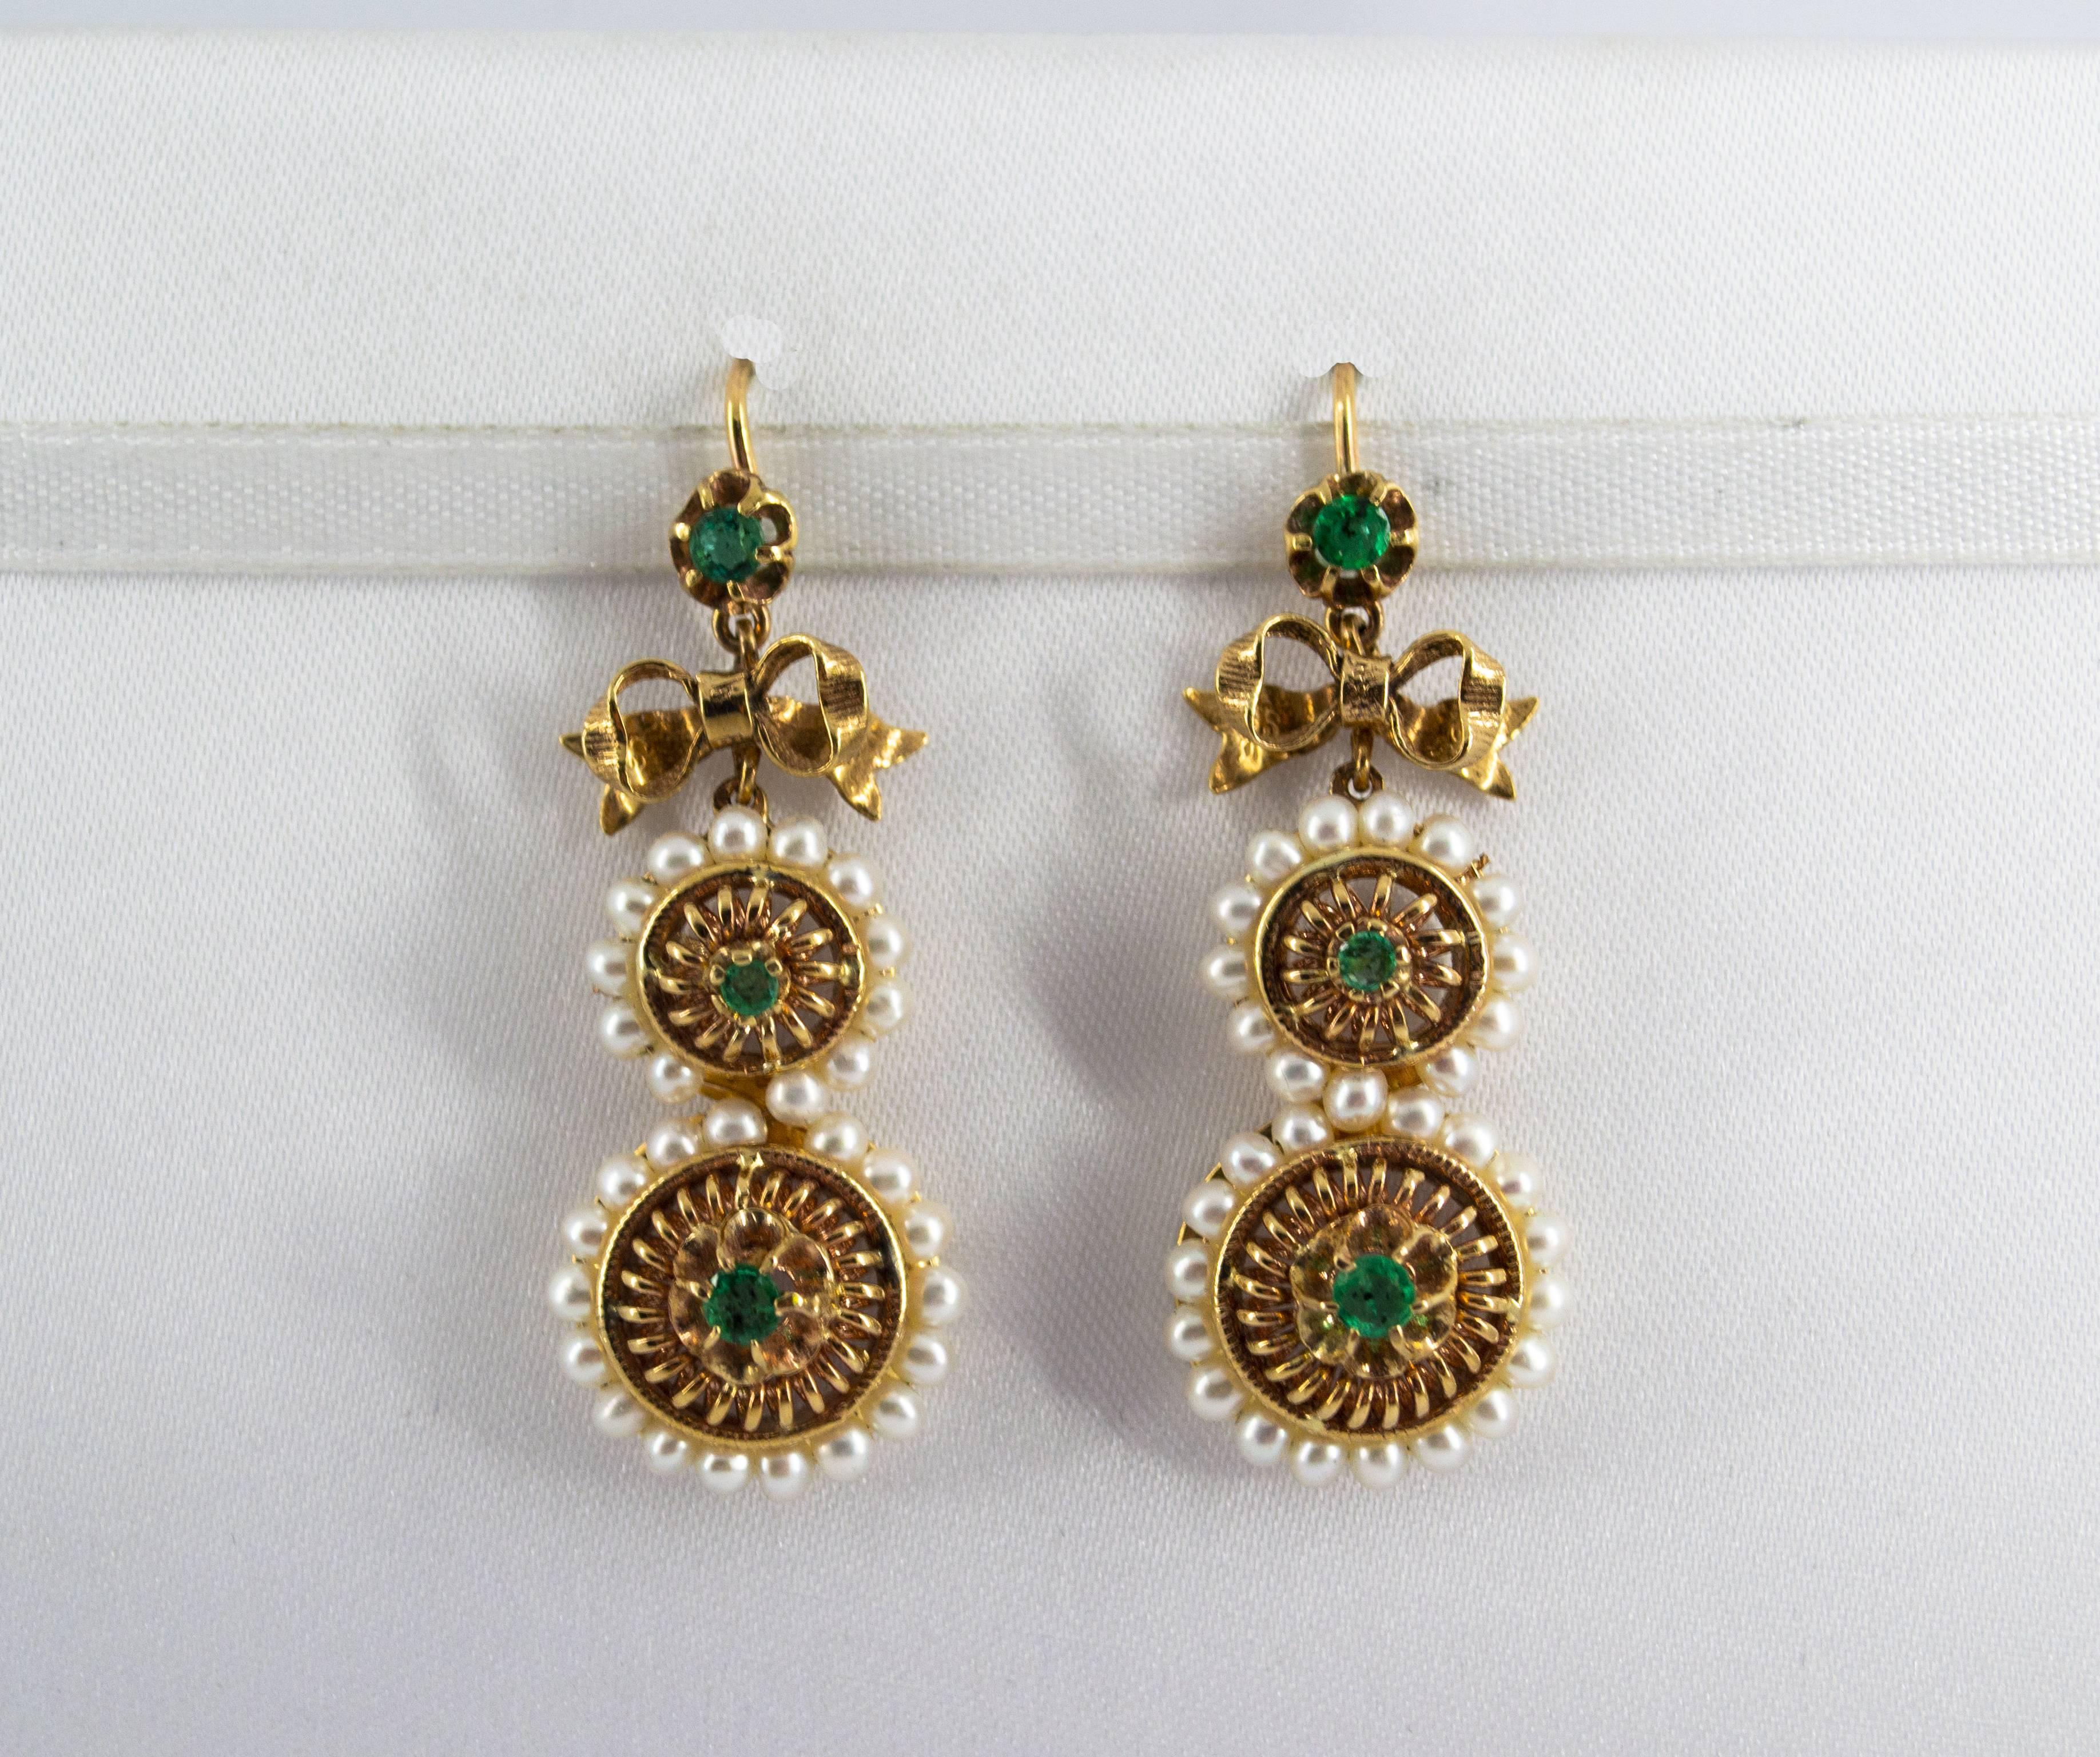 Brilliant Cut Art Deco Style Micro Pearls 1.00 Carat Emerald Yellow Gold Drop Stud Earrings For Sale